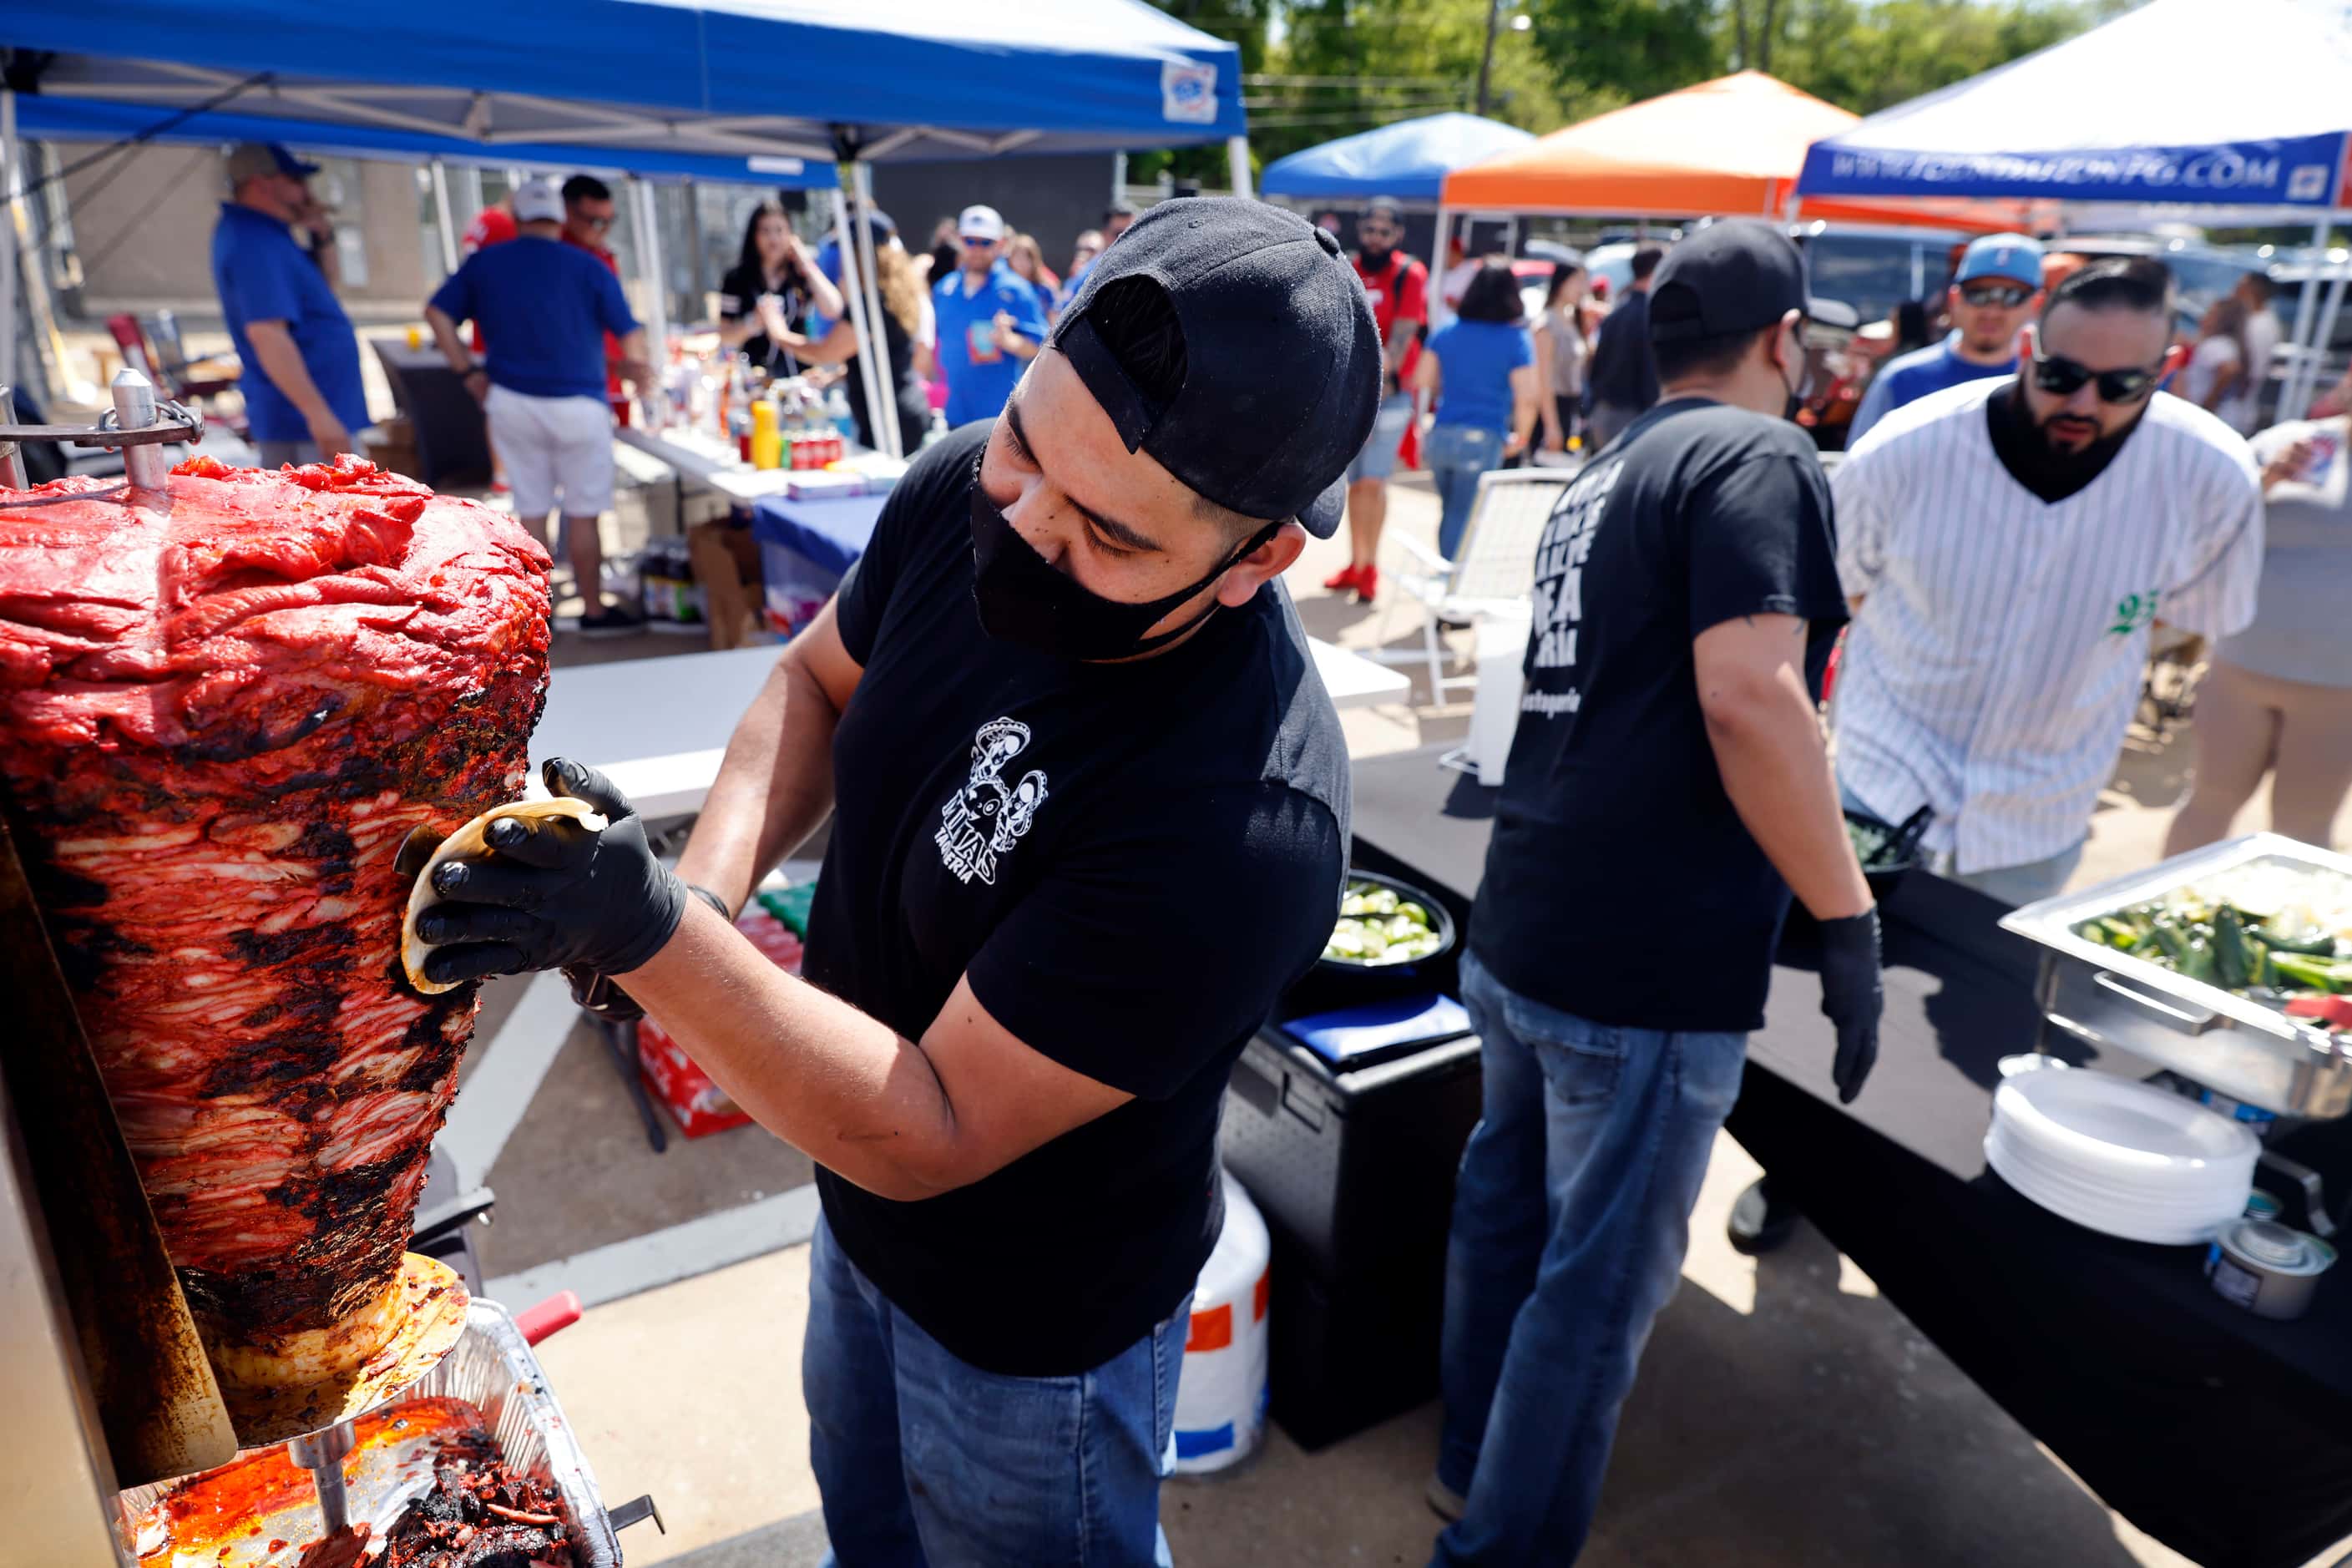 Saul Hernandez trims pork shoulder for Trumpo during an Opening Day tailgate party on...